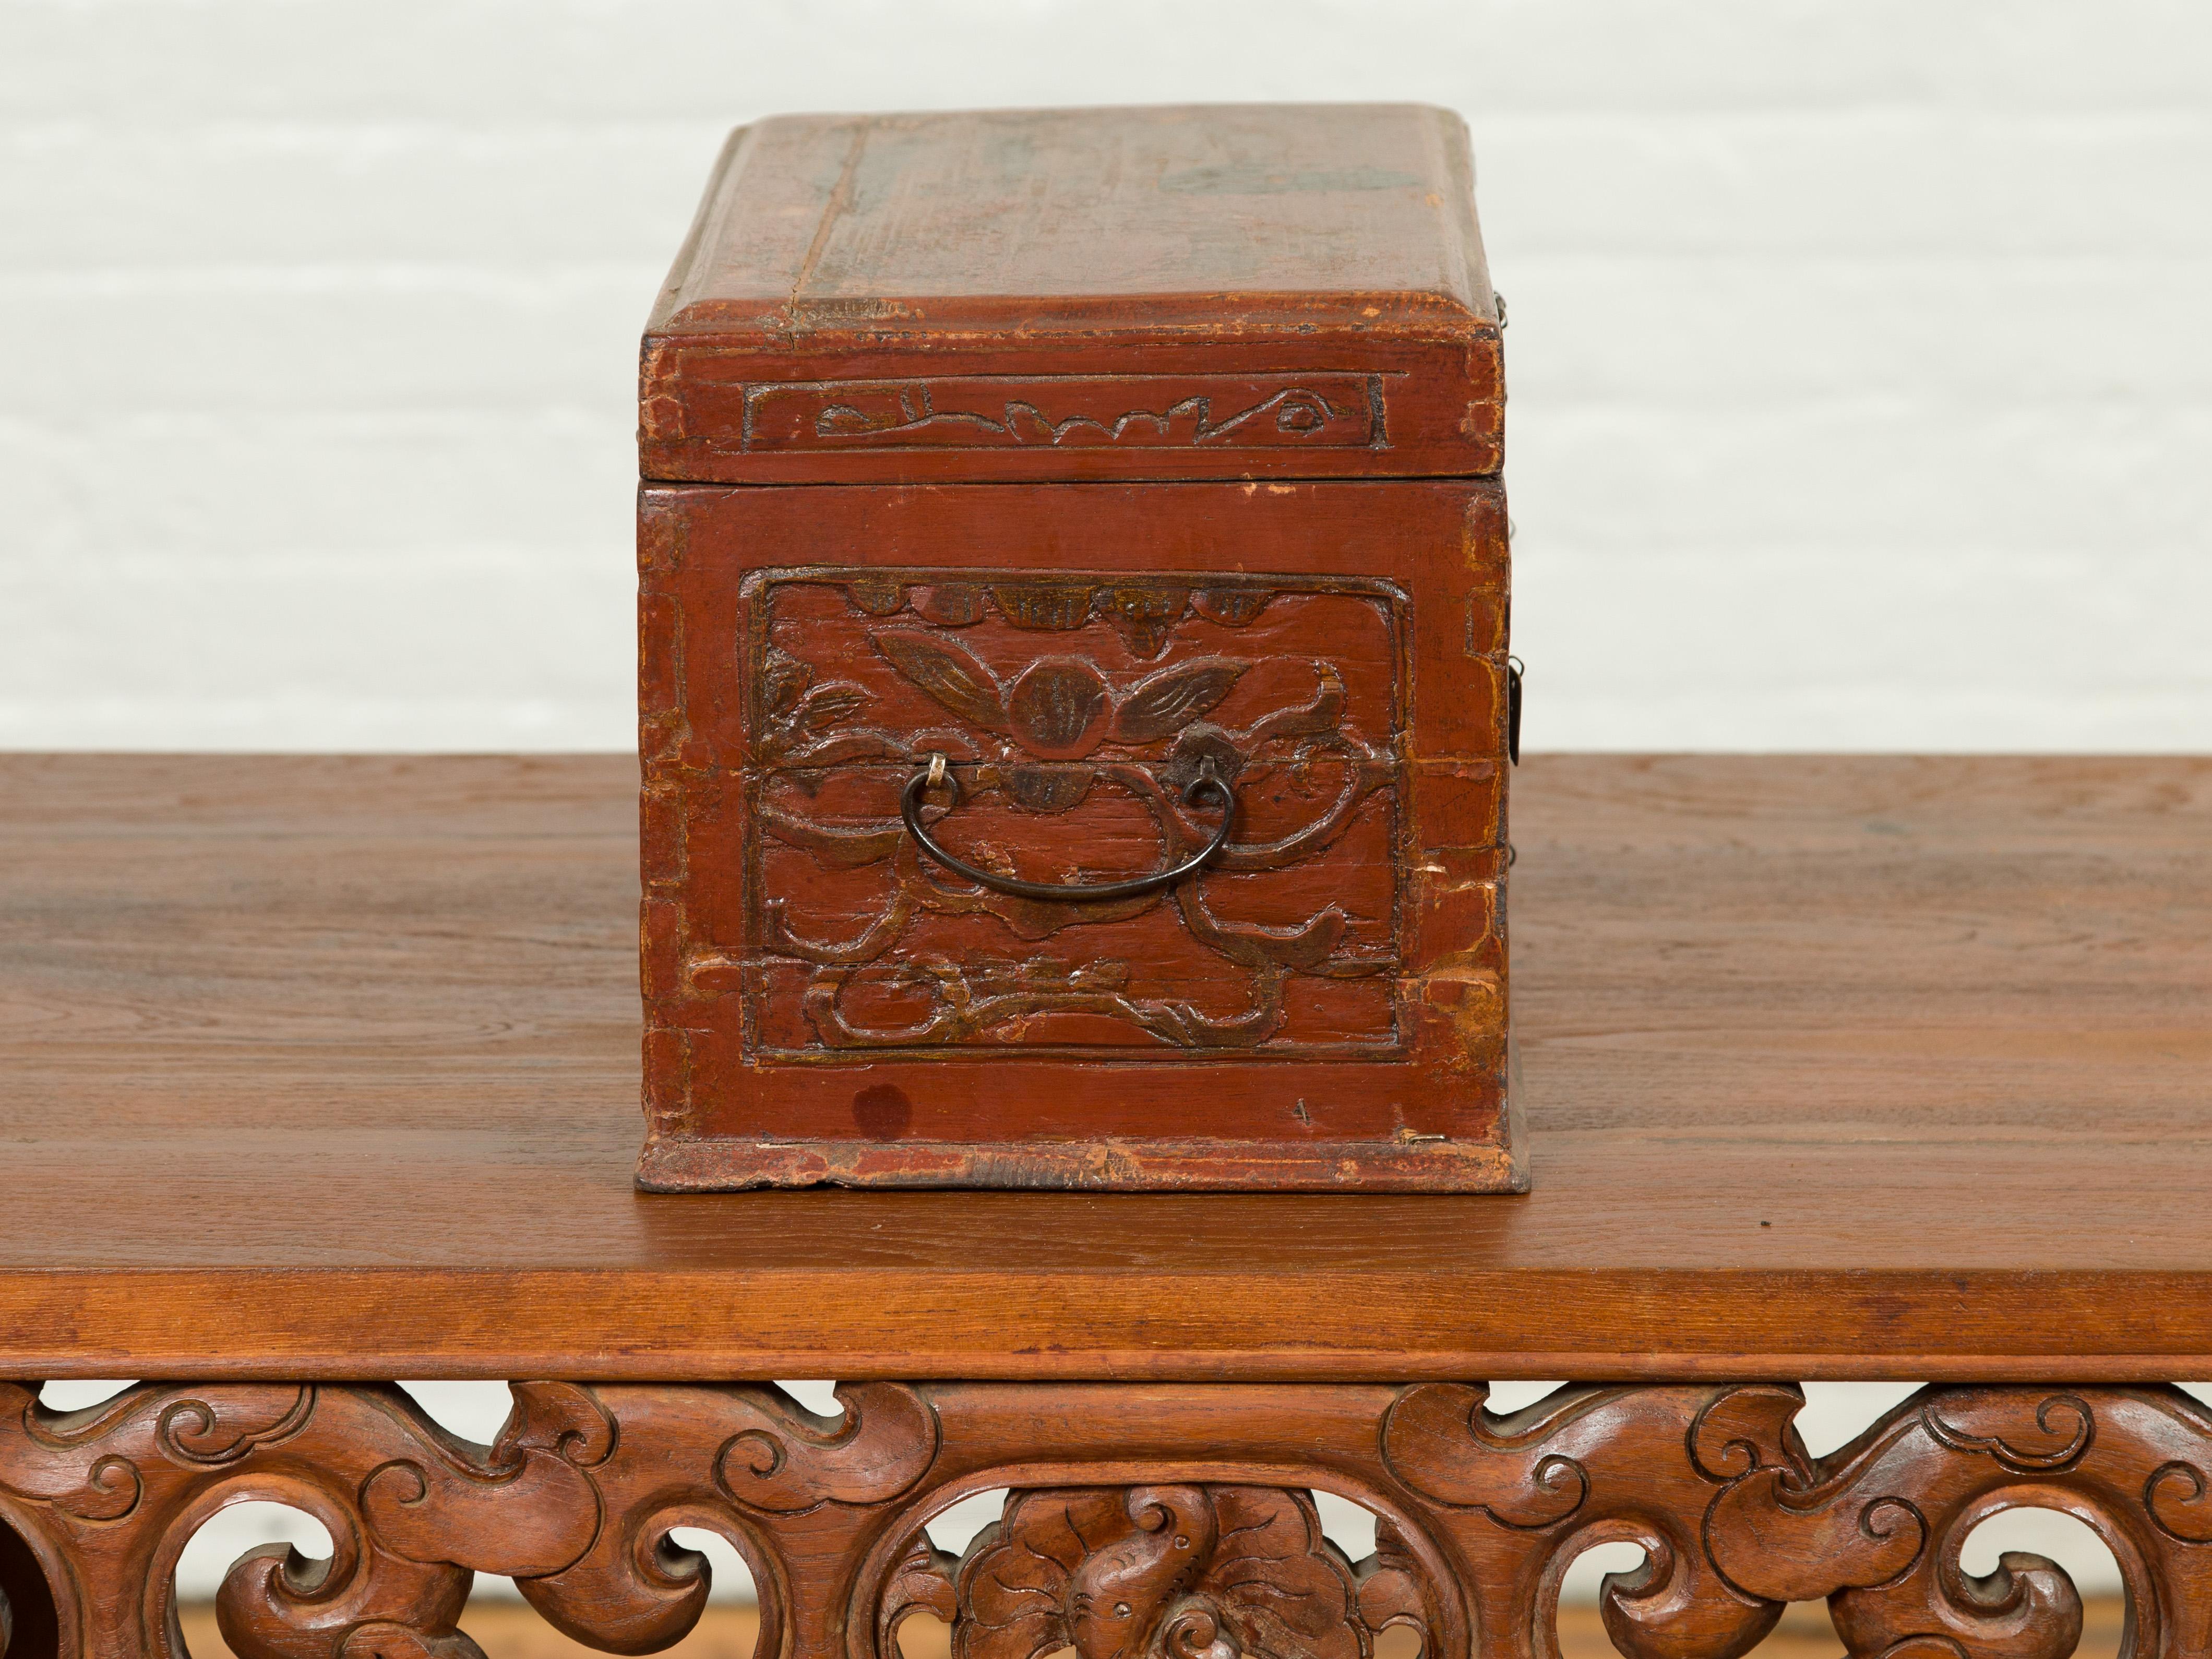 Chinese Qing Dynasty Carved Wooden Jewelry Chest with Lidded Top and Drawers 4